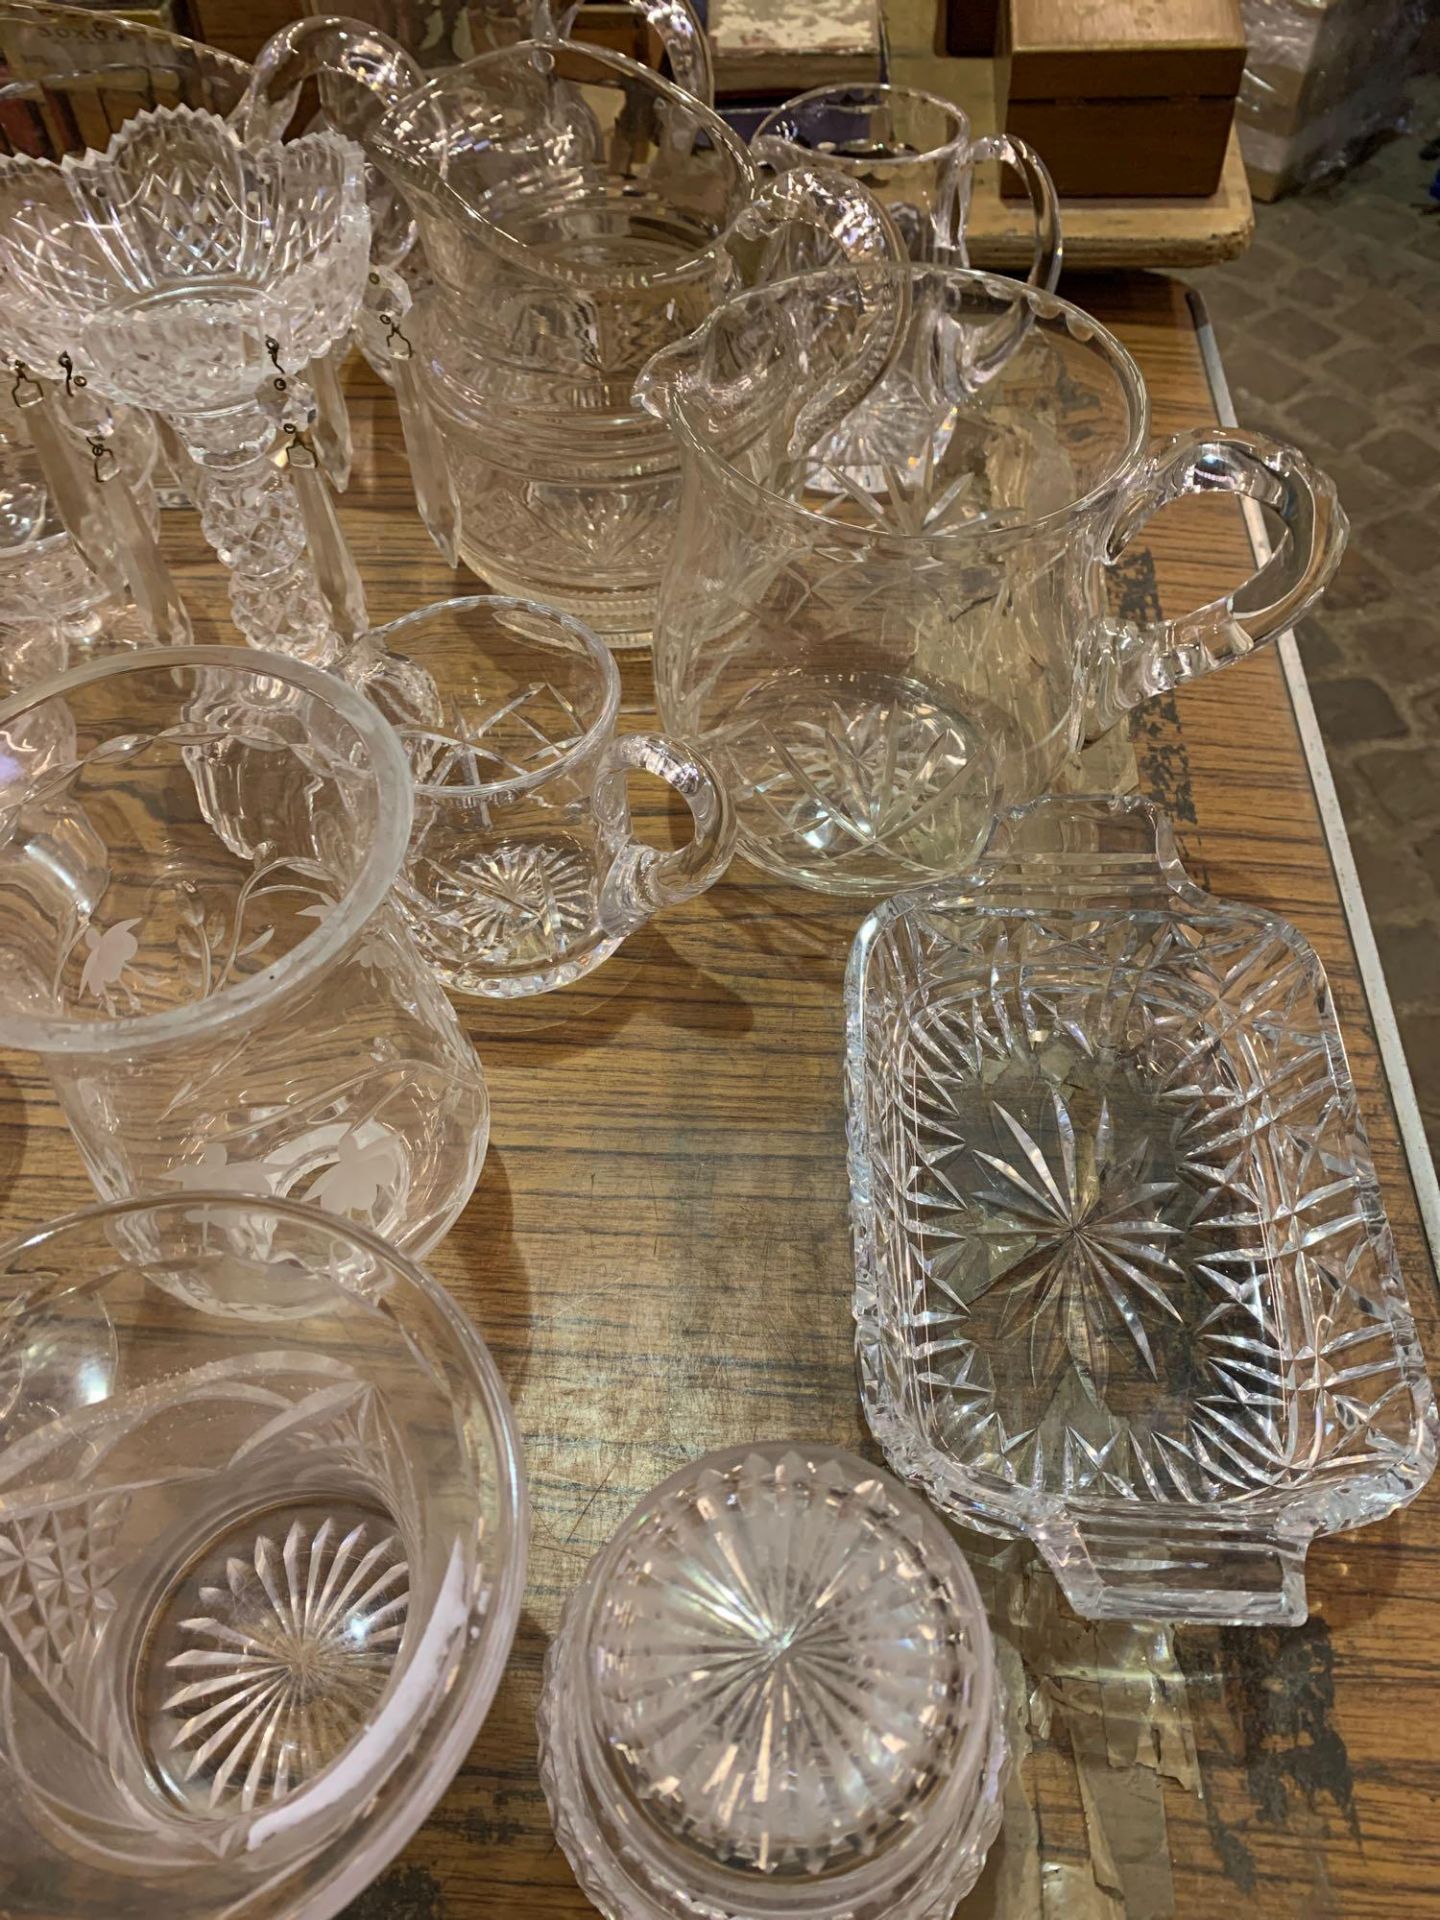 Four cut glass lemonade jugs and other cut glass items - Image 2 of 5